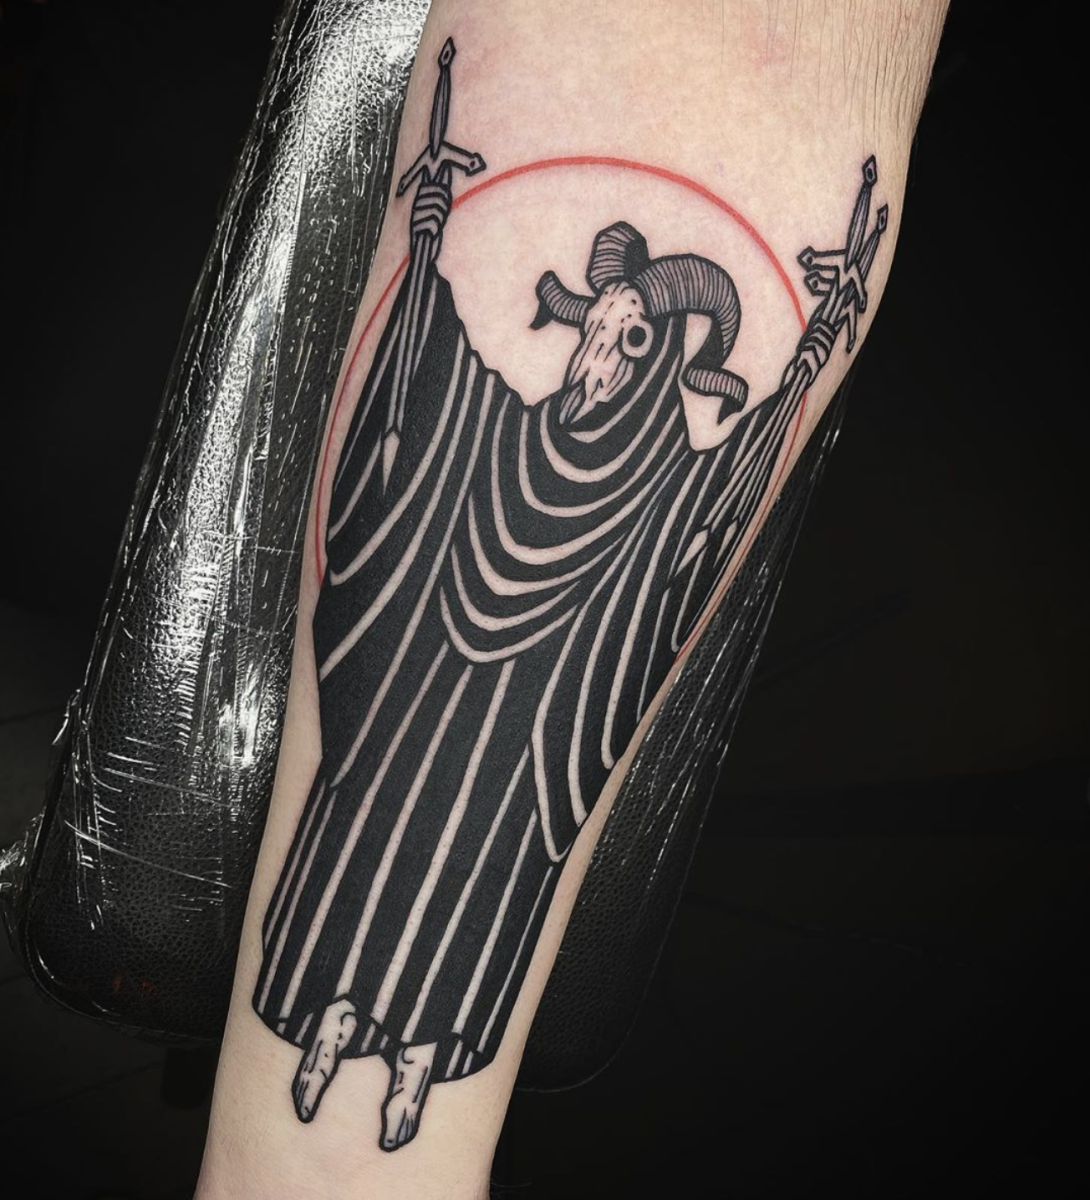 @witchhousetattoo in Hartford, CT 